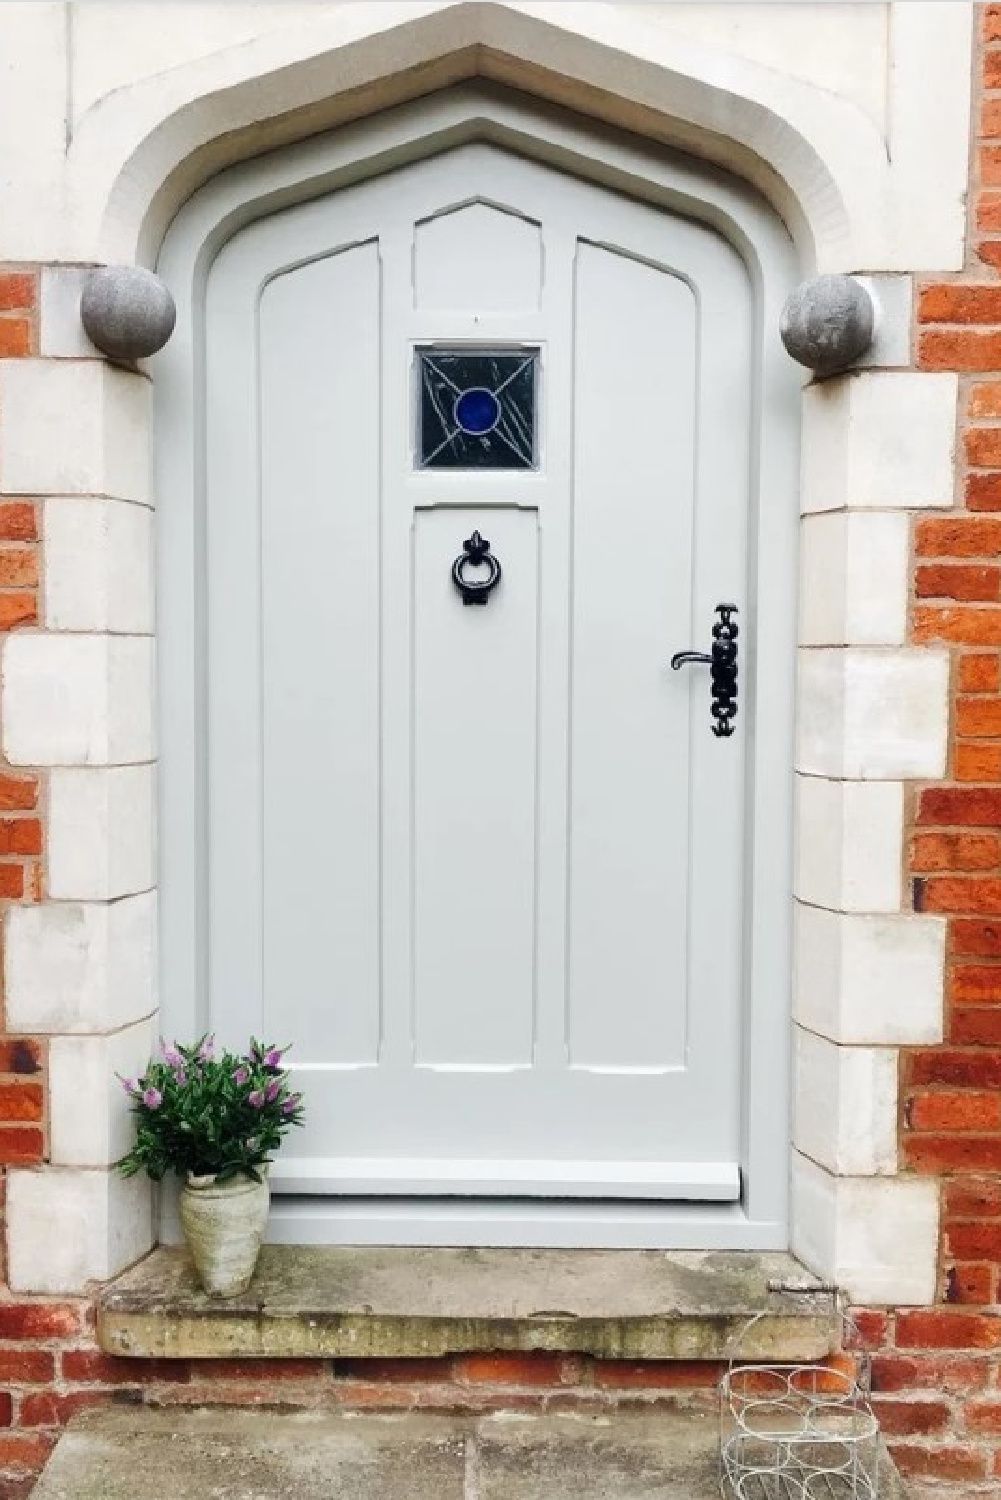 Gothic arched front door painted Farrow & Ball Hardwick White - @sharpe_russell. #hardwickwhite